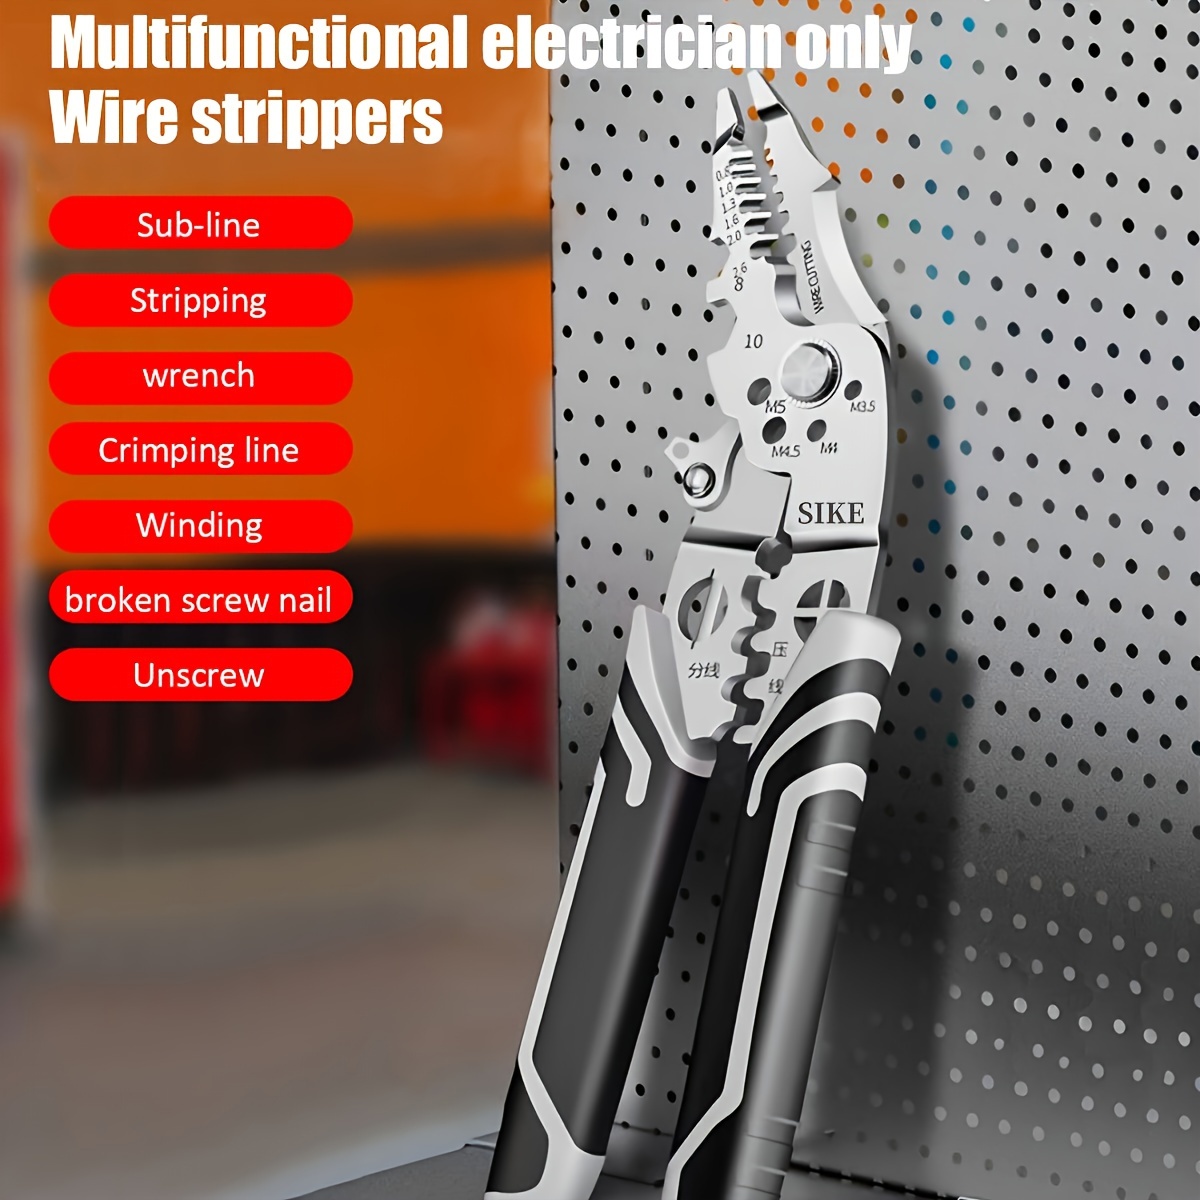 

Multi-function Electrician's Wire Stripper - Versatile Tool For Stripping, Cutting, Crimping & More - Ideal For Electrical Work, Auto Repairs & Home Maintenance